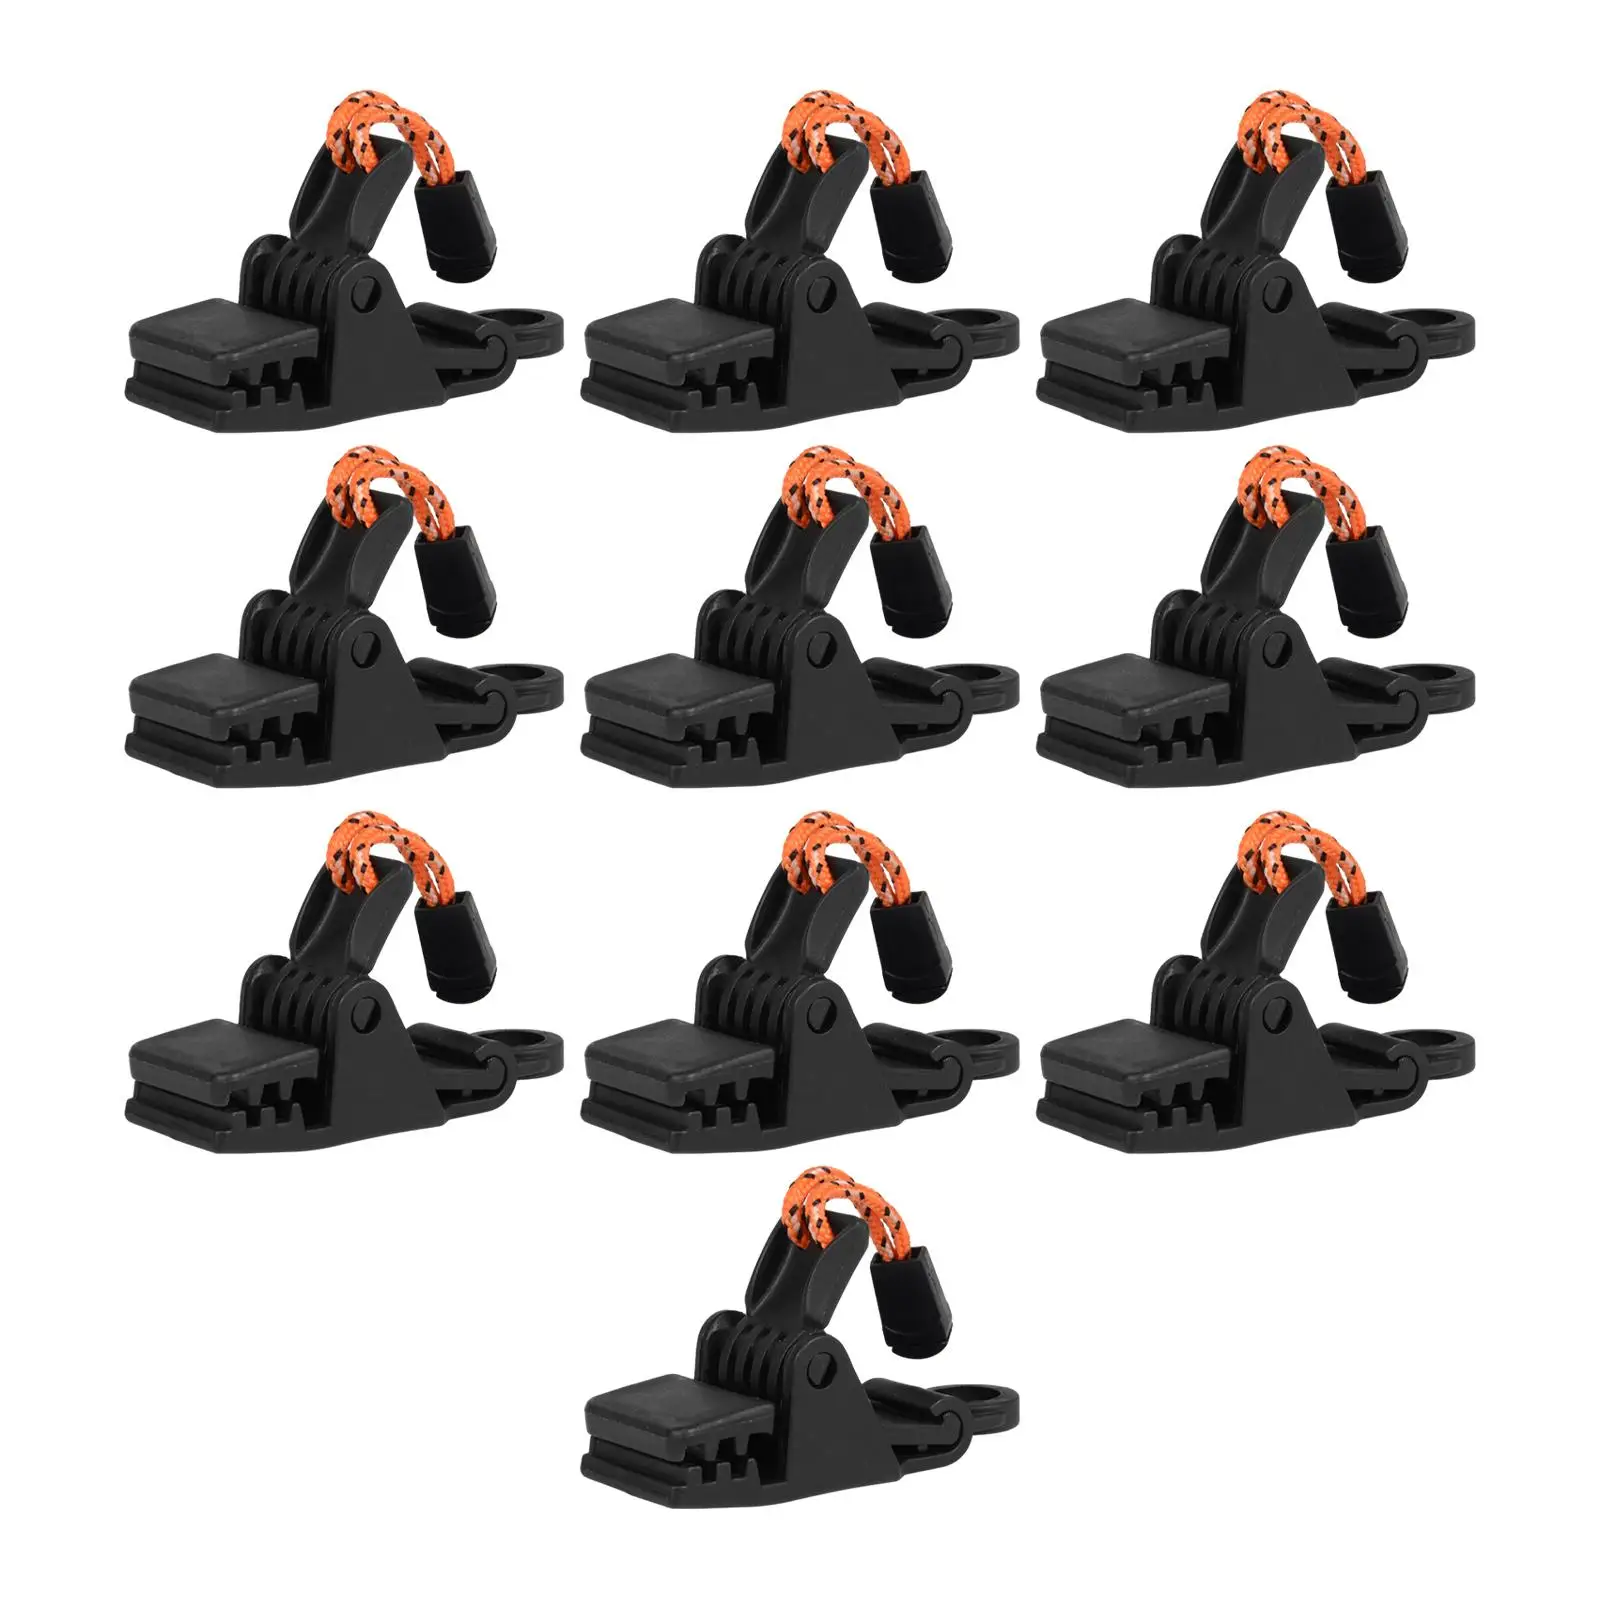 10Pcs Tarp Clips Reusable Awning Clamps Canopy Tent Clips Clamp for Car Covers Camping Backpacking Hiking Swimming Pool Covers